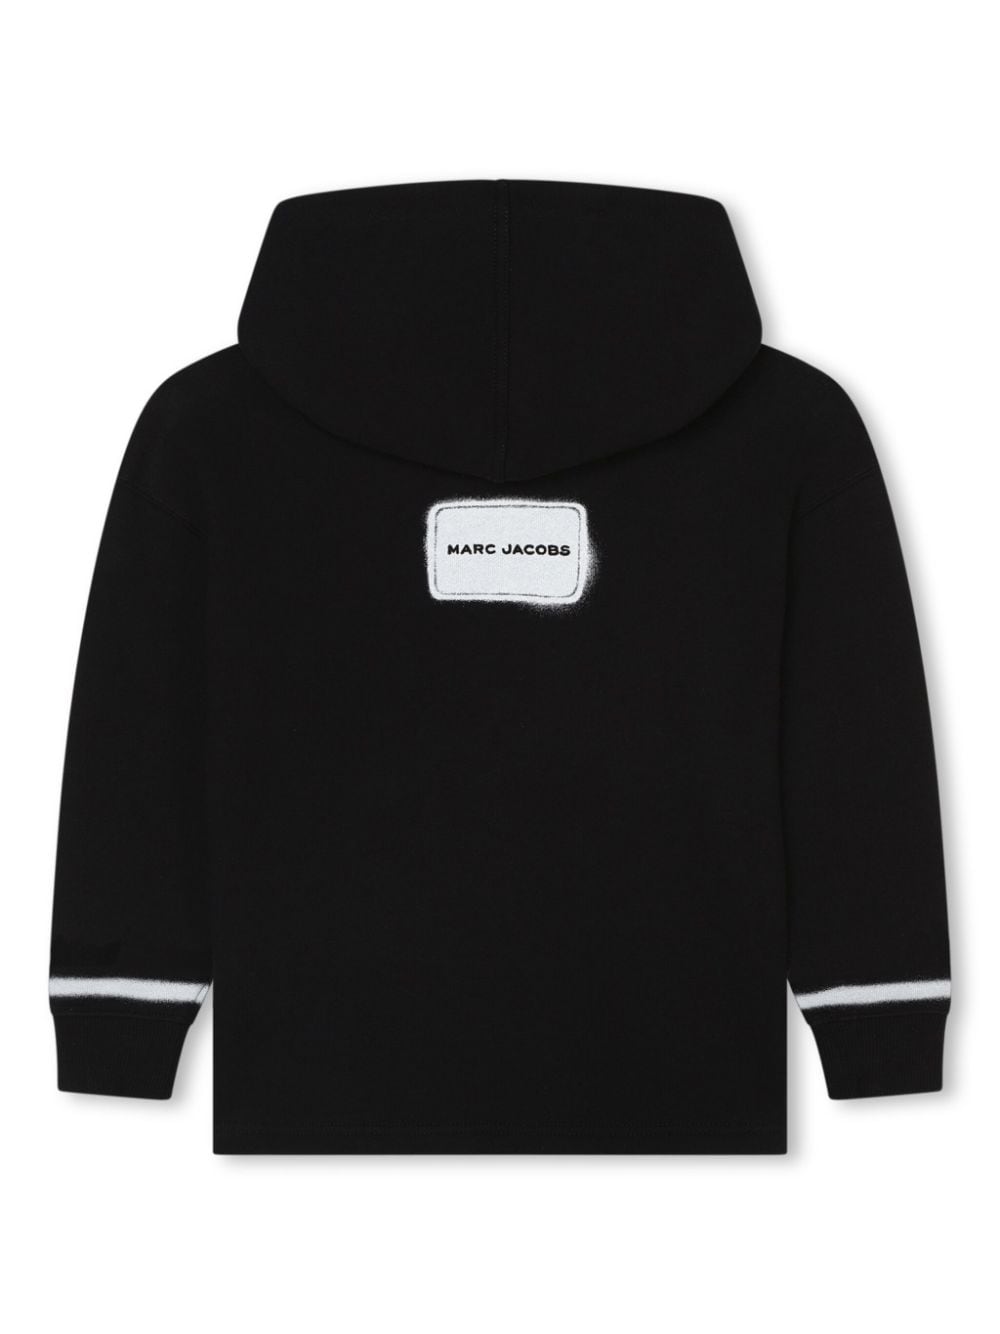 Image 2 of Marc Jacobs Kids spray-paint cotton hoodie